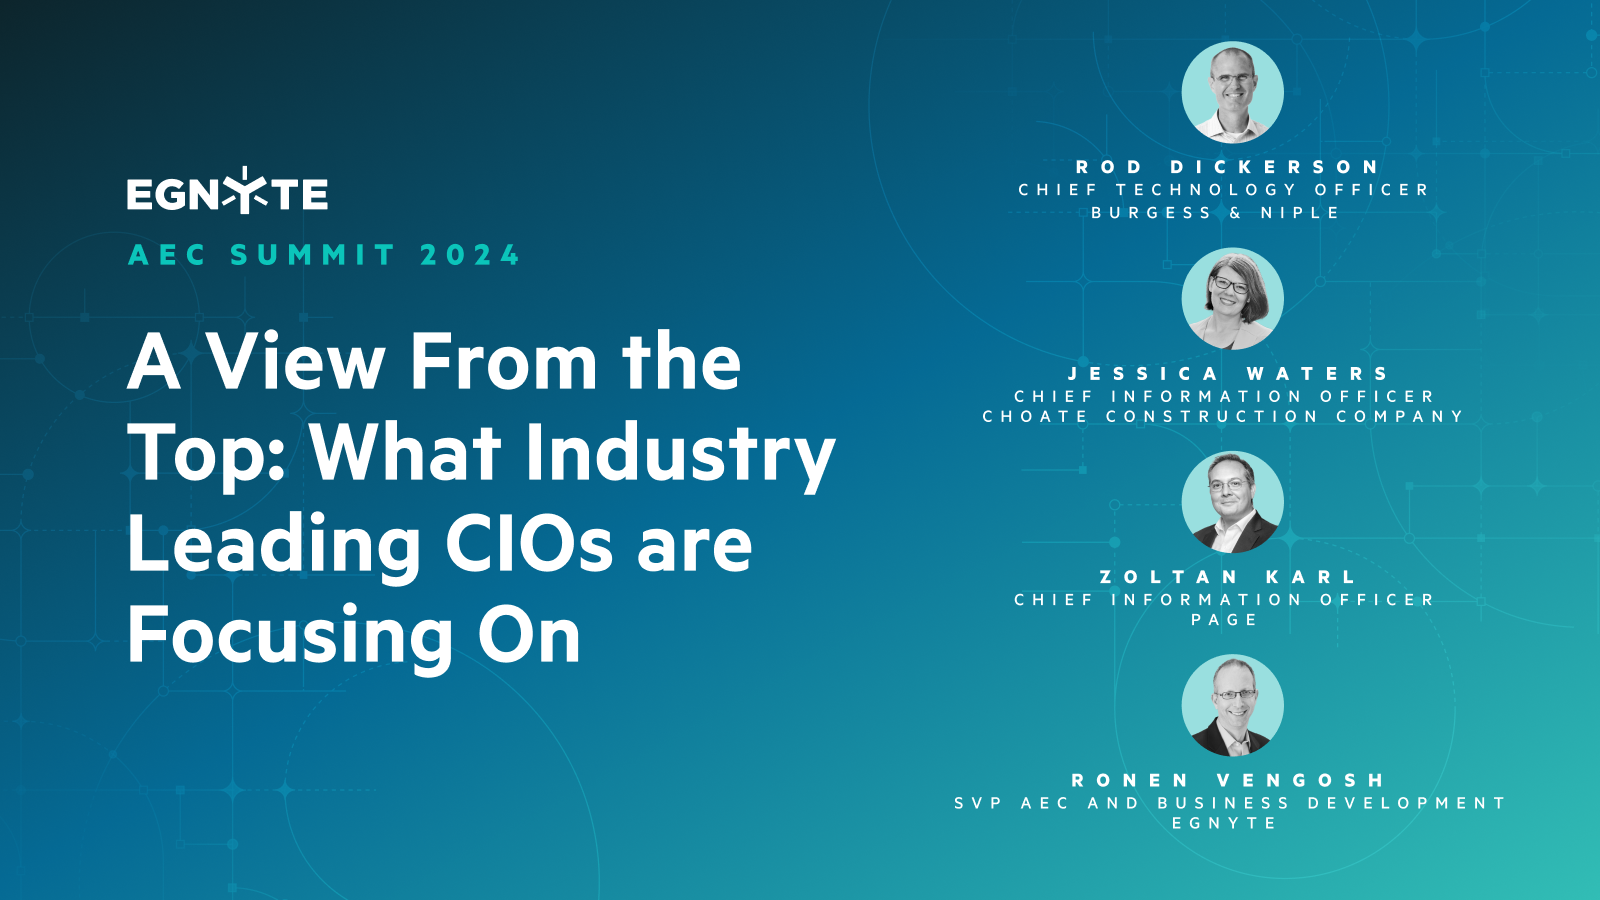 A View from the Top: What Industry Leading CIOs are Focusing On